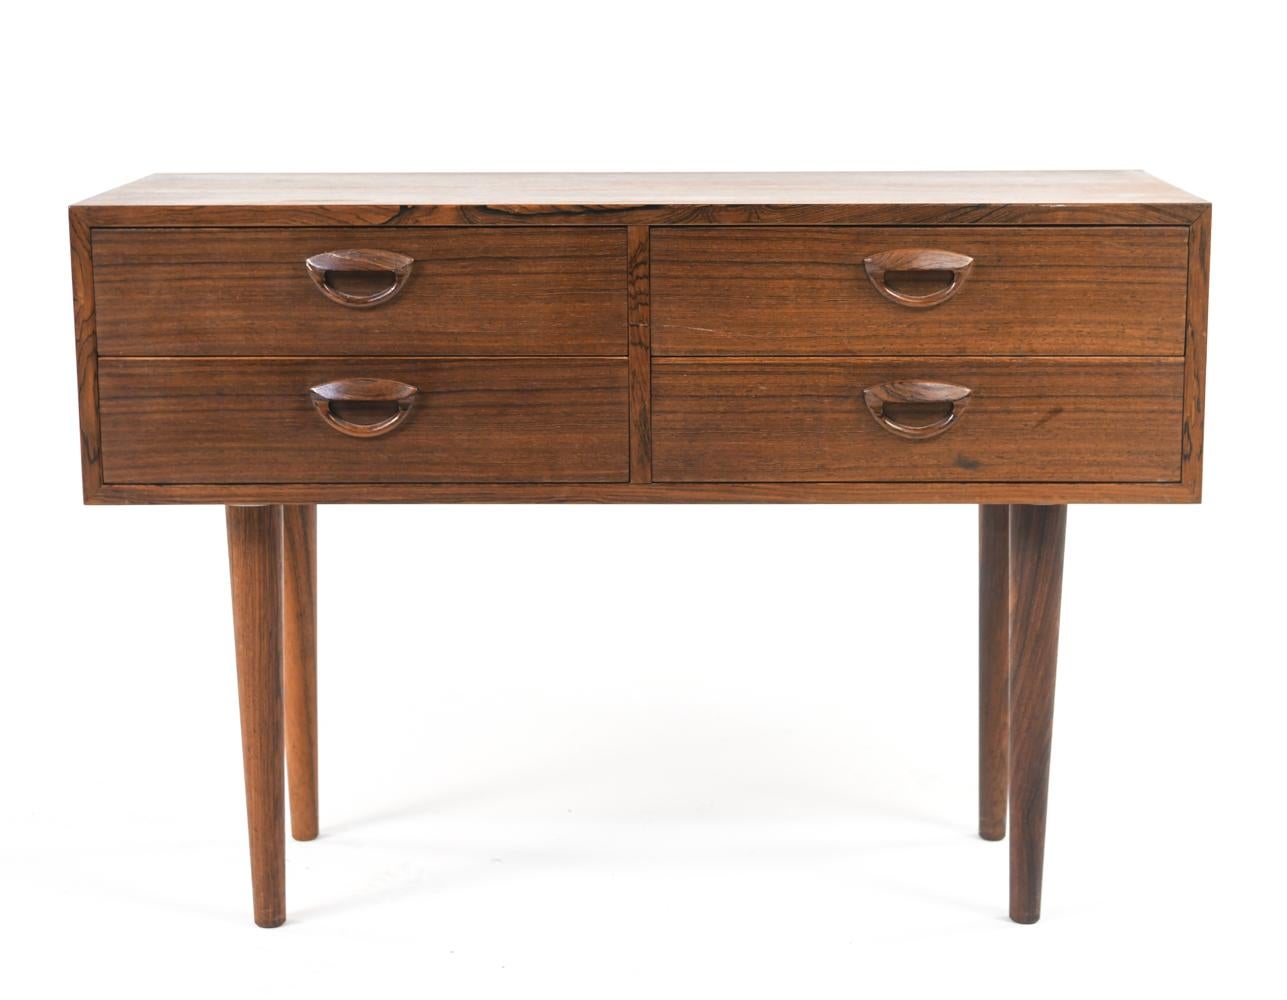 An exquisite Kai Kristiansen Danish mid-century petite four-drawer chest in rosewood veneer, with shaped drawer pulls, on tapered legs. Clean maple drawer interiors.